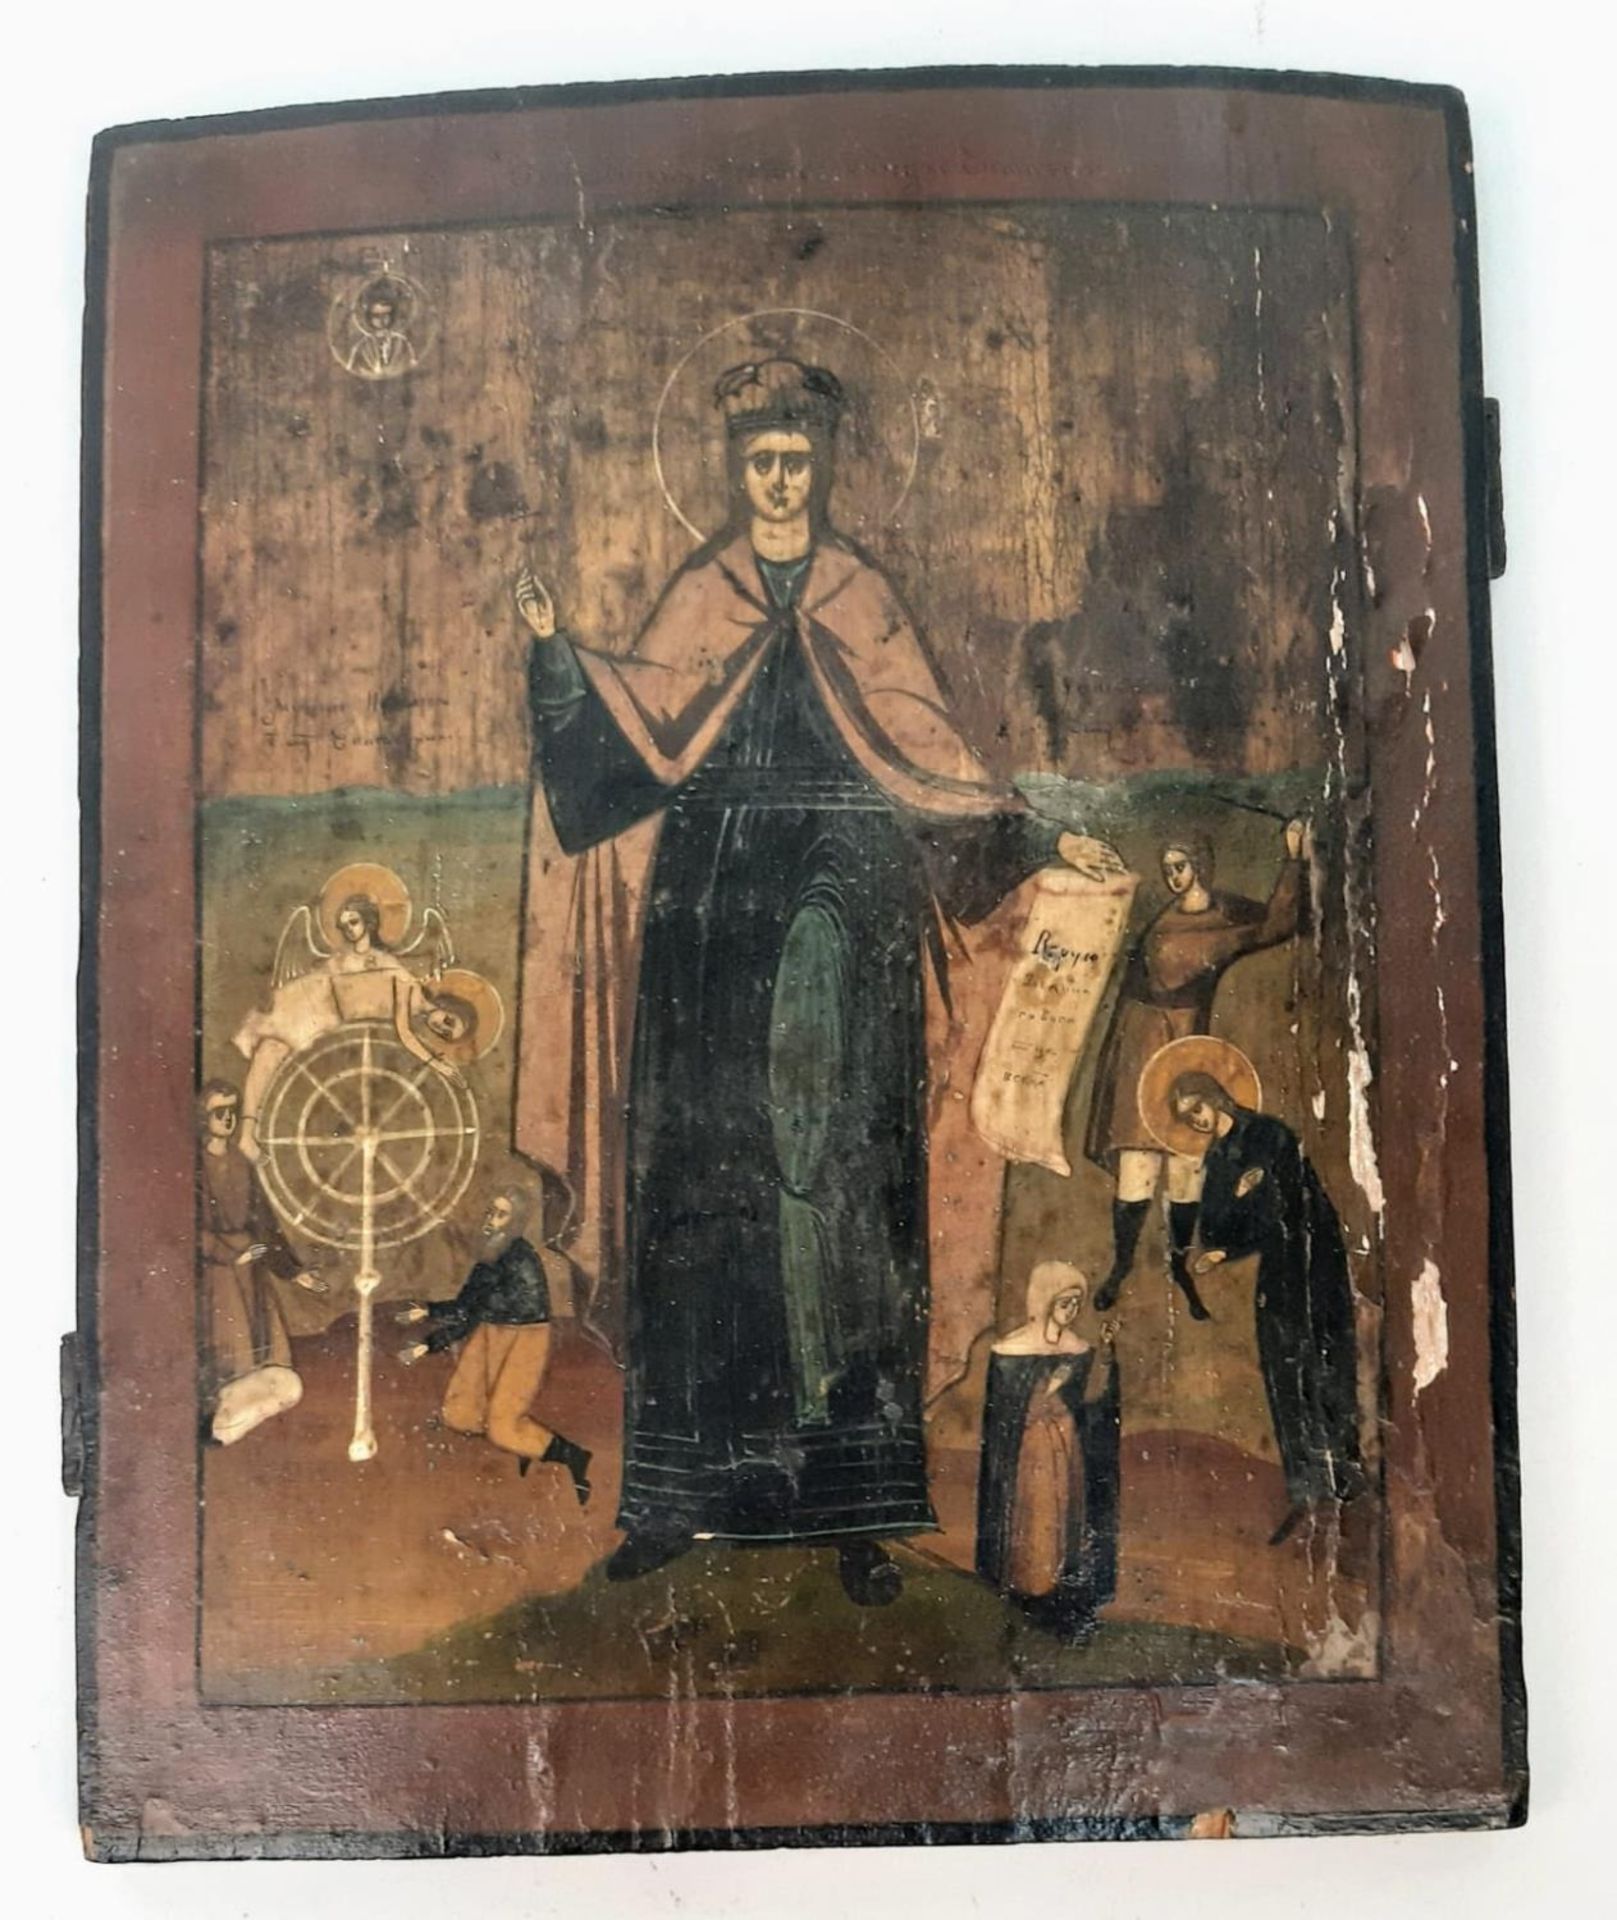 An Antique Icon of Saint Catherine of Alexandria and the Spiked Wheel - Oil on wood. Saint Catherine